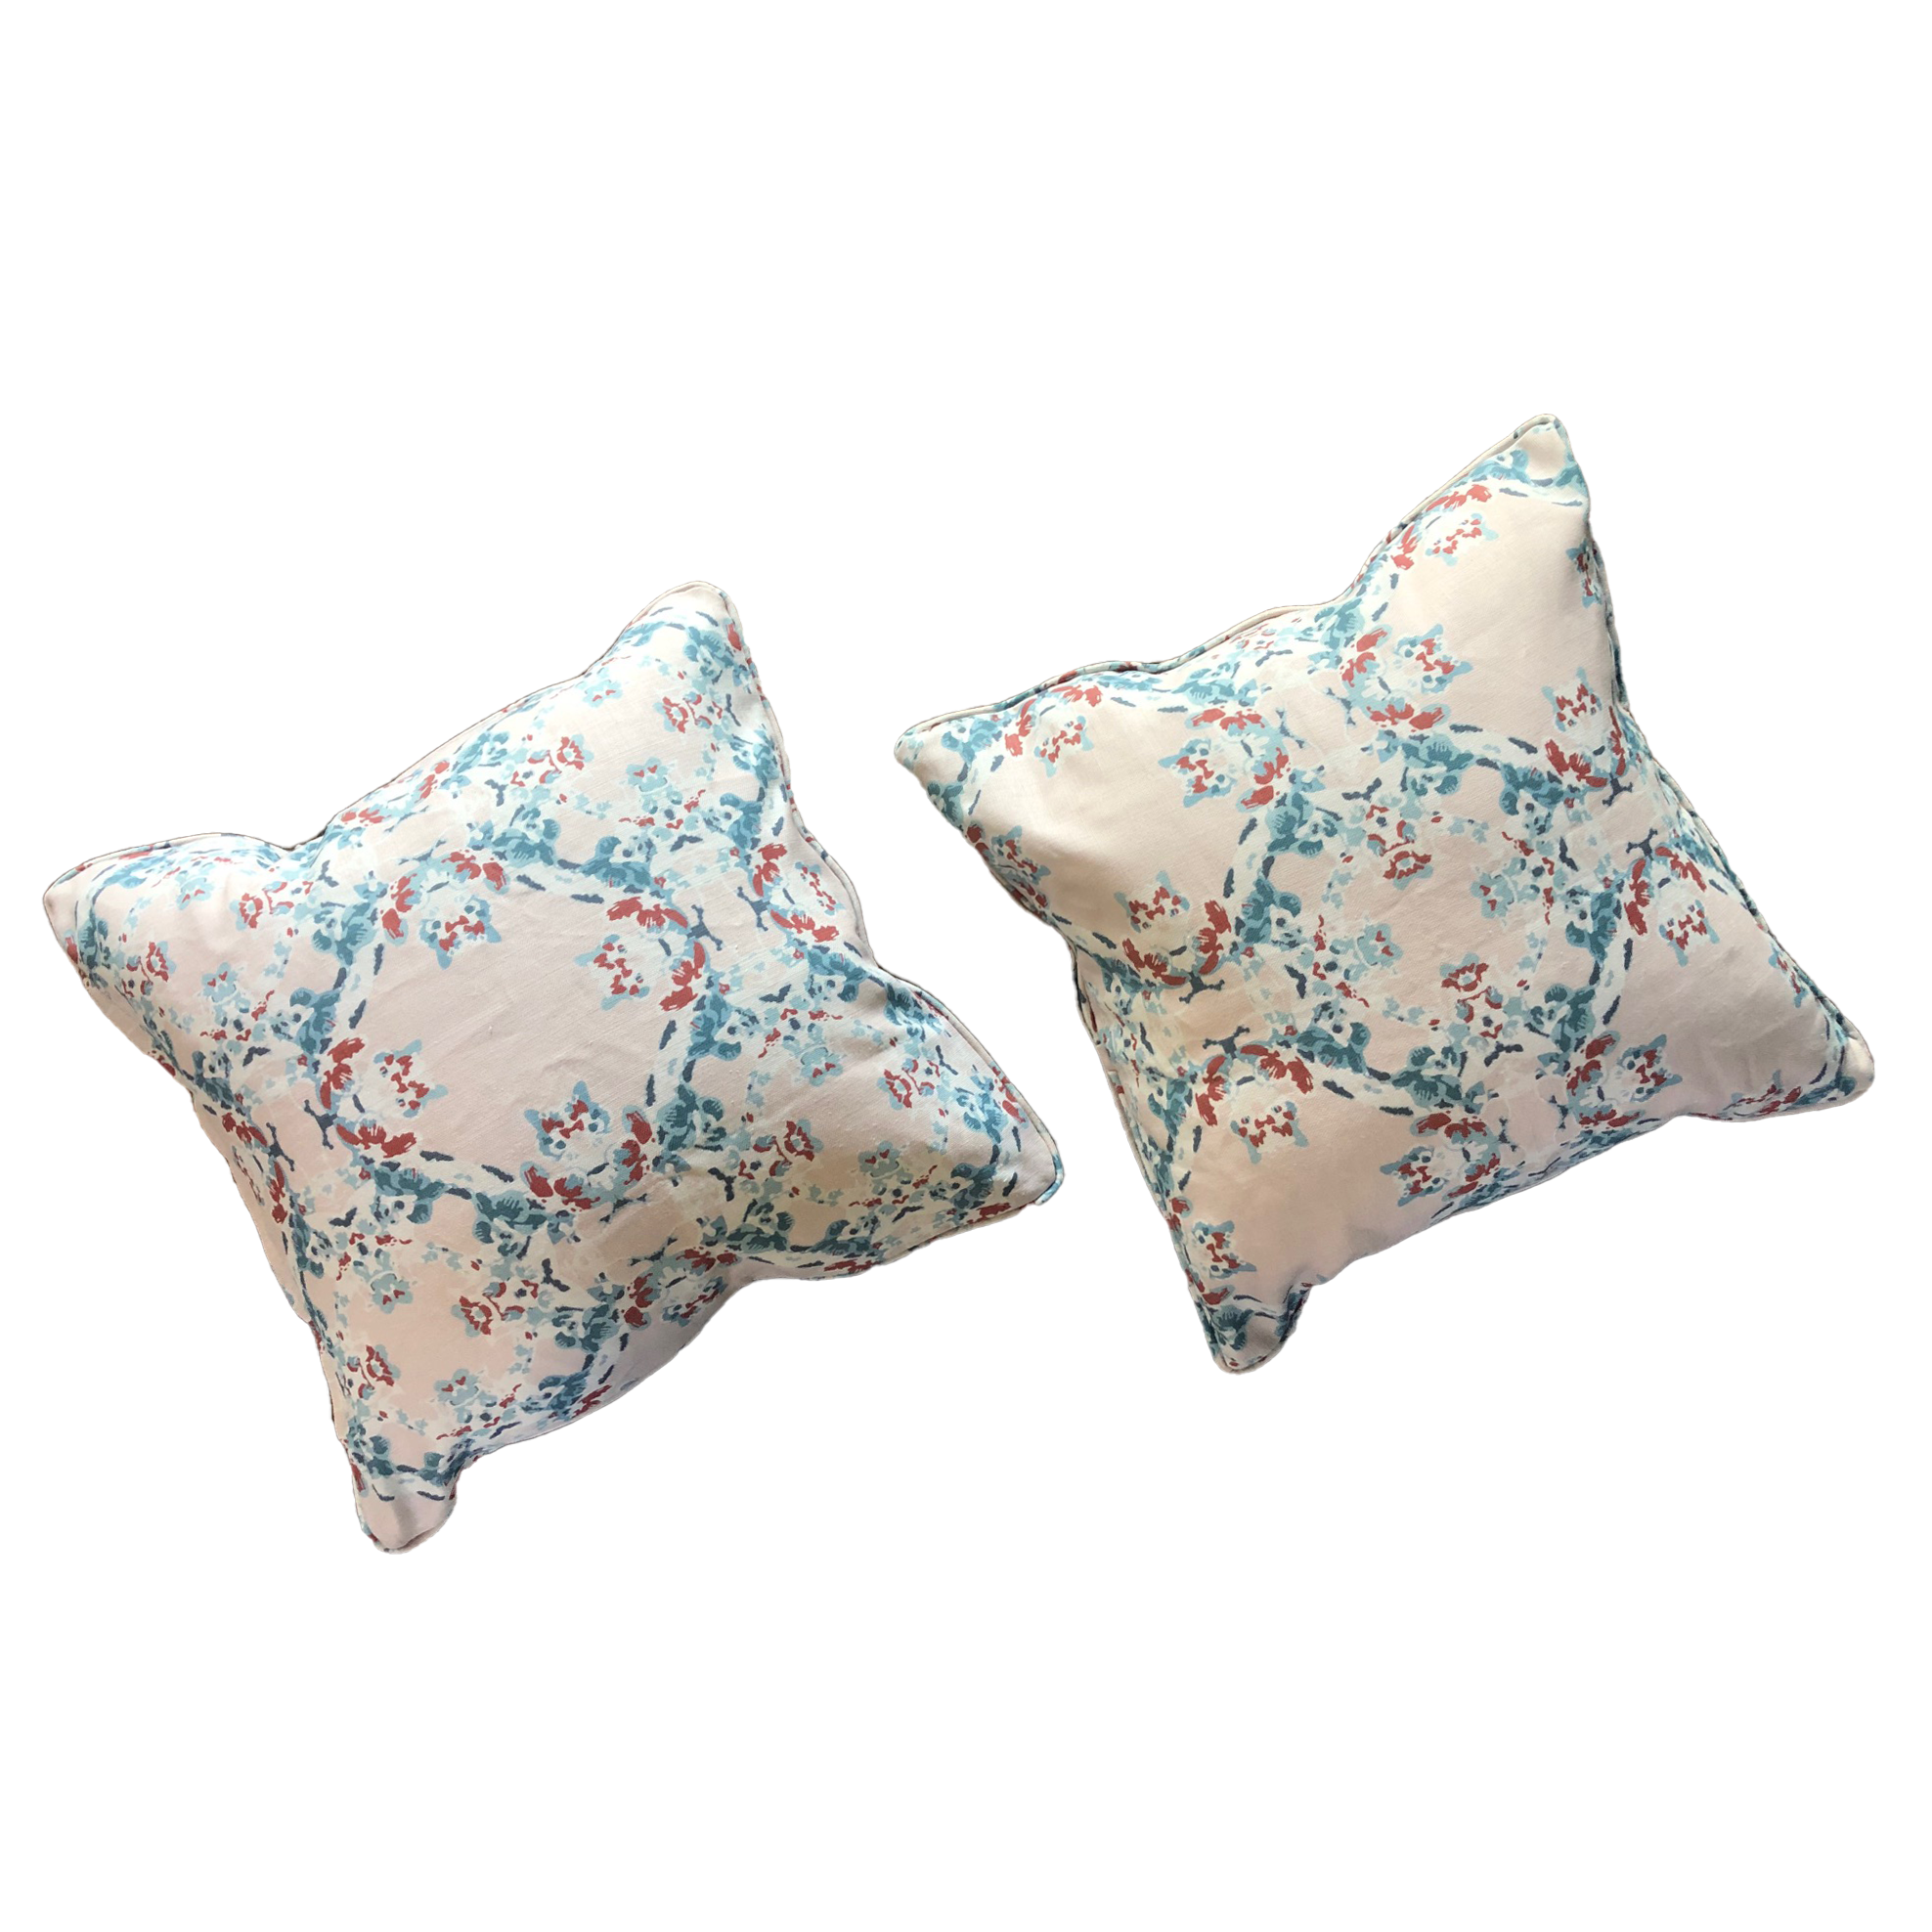 AVAILABLE: Orchid Alley Decorative Pillow Cover